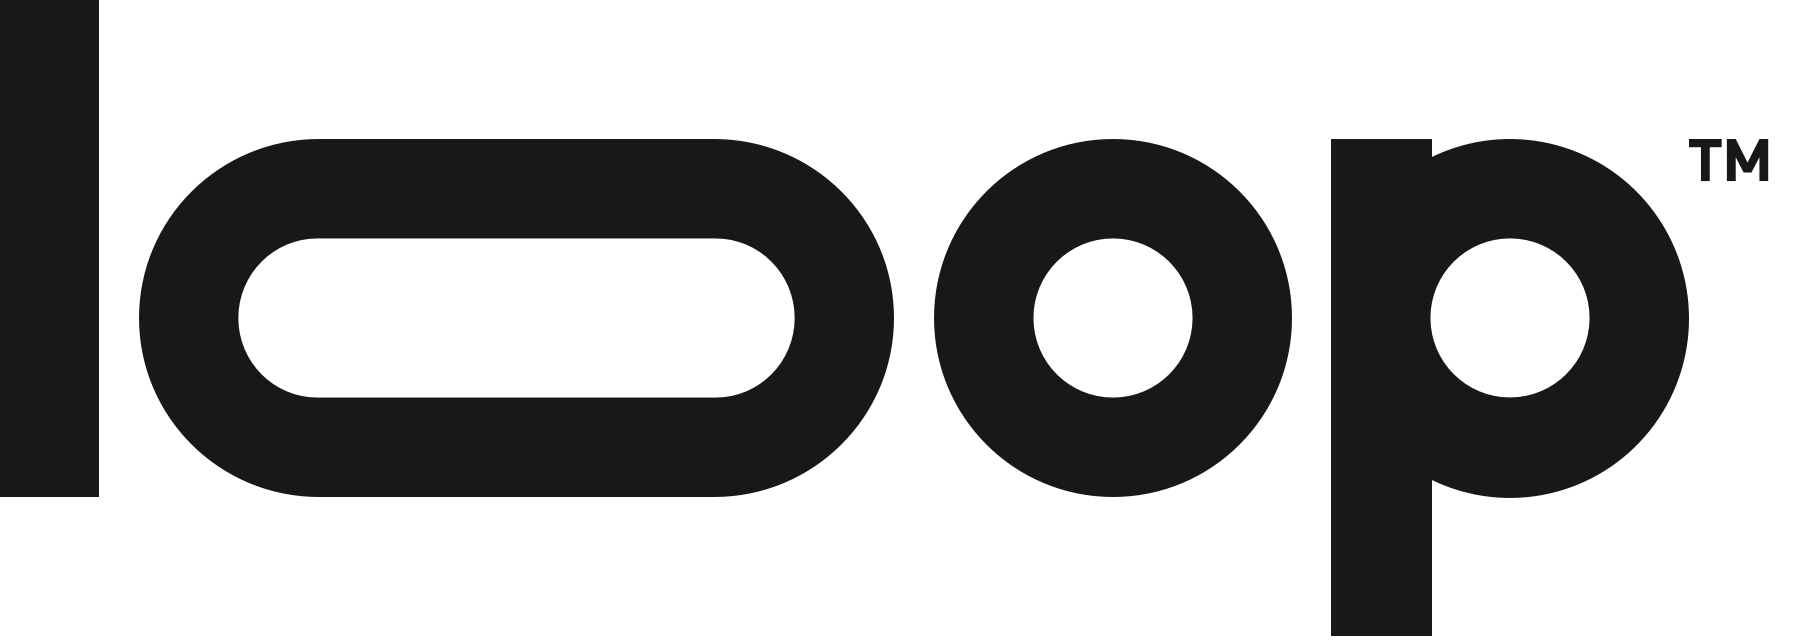 Loop Media Sees Increased Market Share and Revenue Growth Through its Industry-Best Digital Out-of-Home TV and Digital Signage Platforms